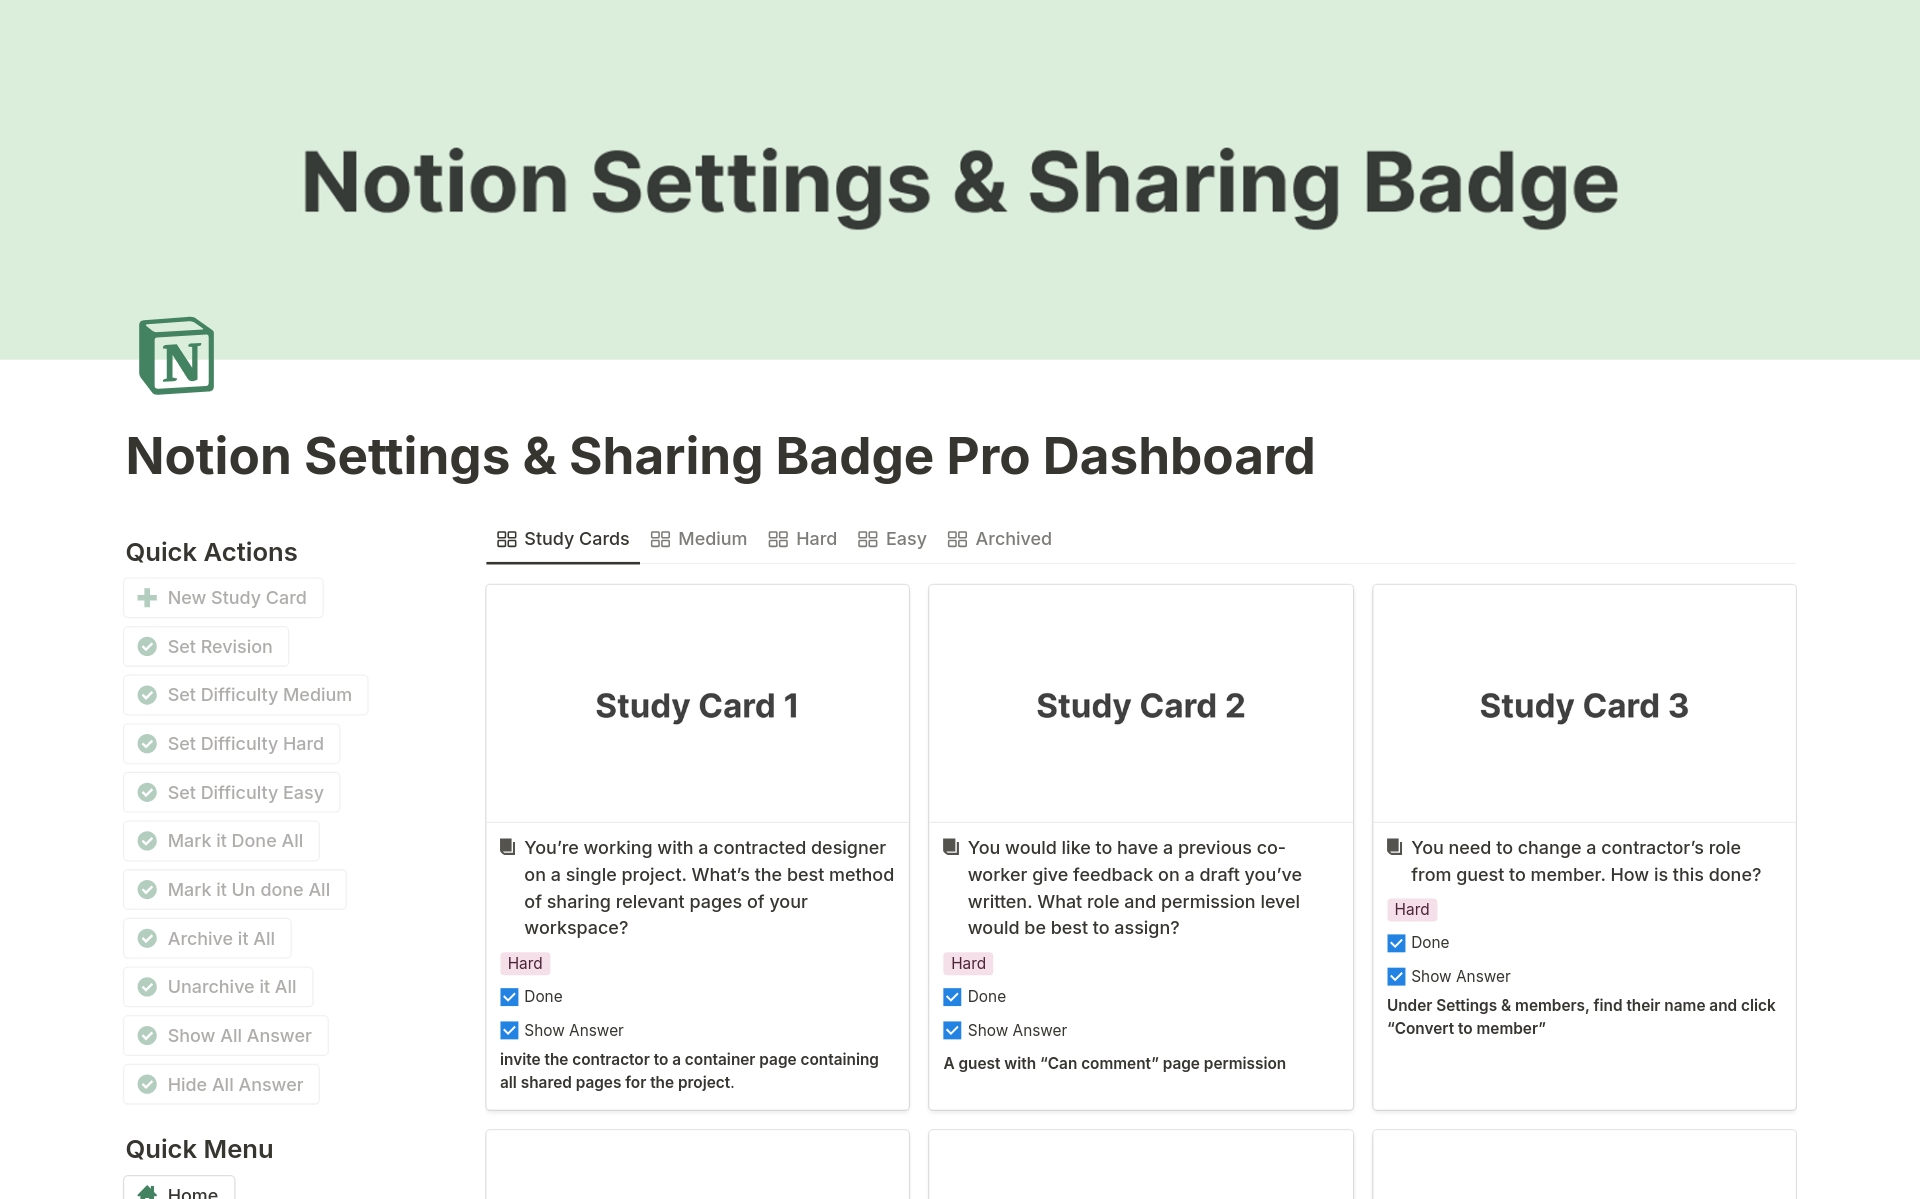 Notion Settings & Sharing Badge Study Cards Pro

🚀 Earn Your Notion Settings & Sharing Badge with Confidence: Your Path to Mastery Starts Here 🚀